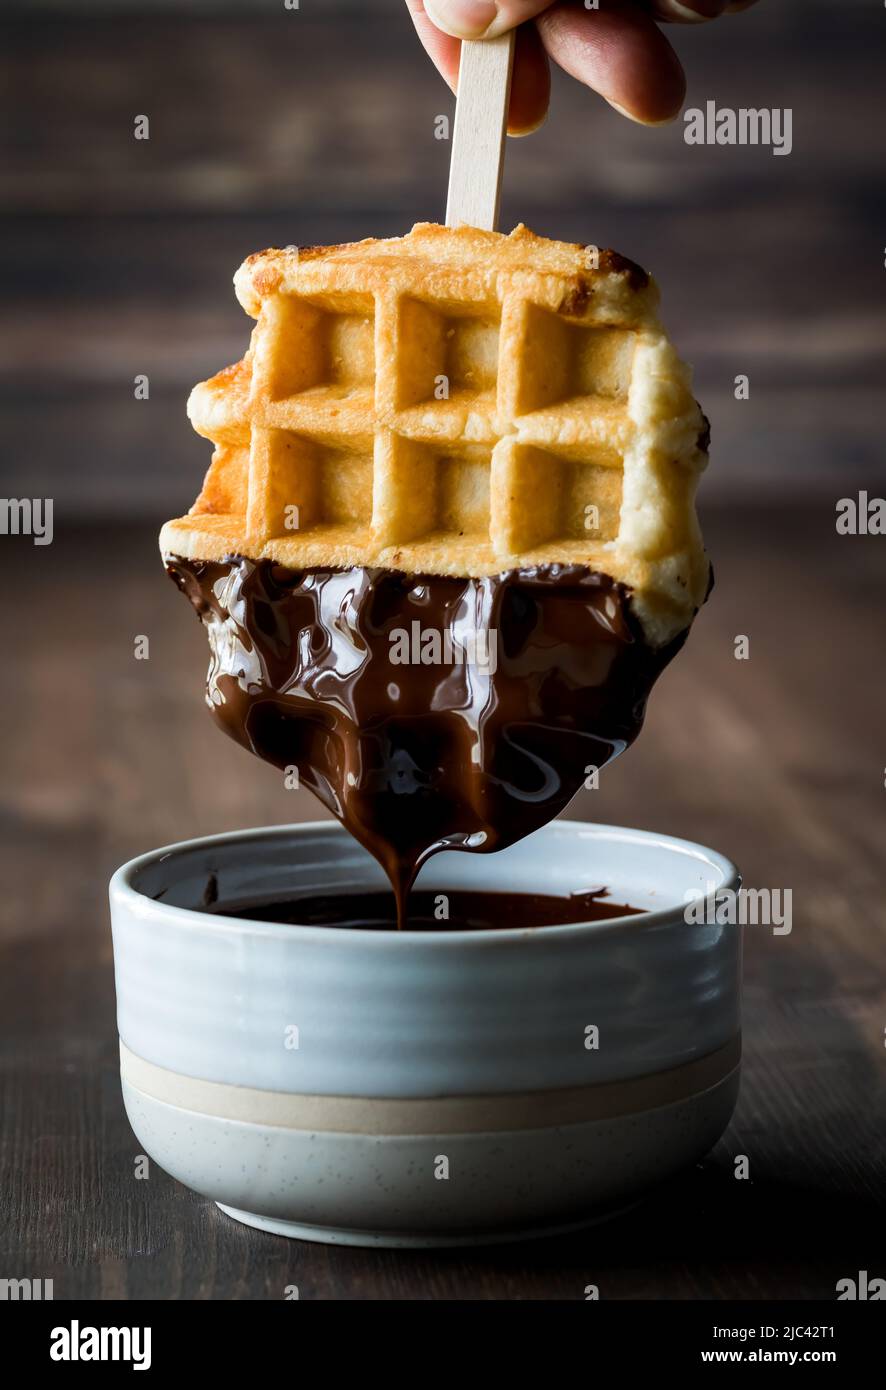 A waffle being dipped into melted chocolate and dripping into a bowl. Stock Photo